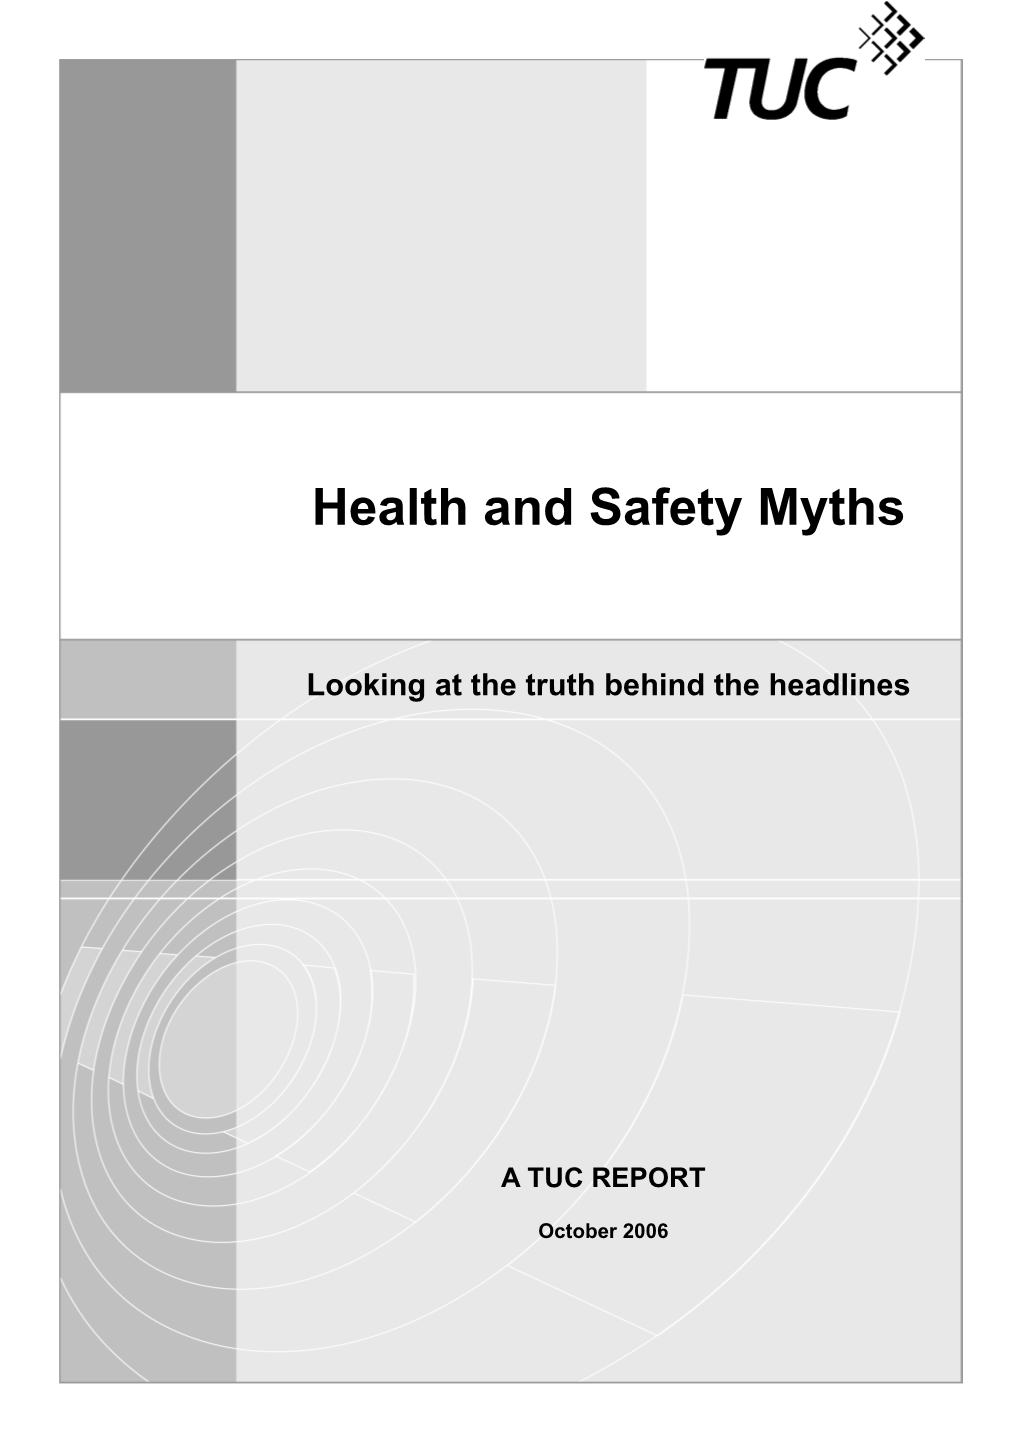 October 2006HEALTH and SAFETY MYTHS the TRUTH BEHIND the HEADLINES